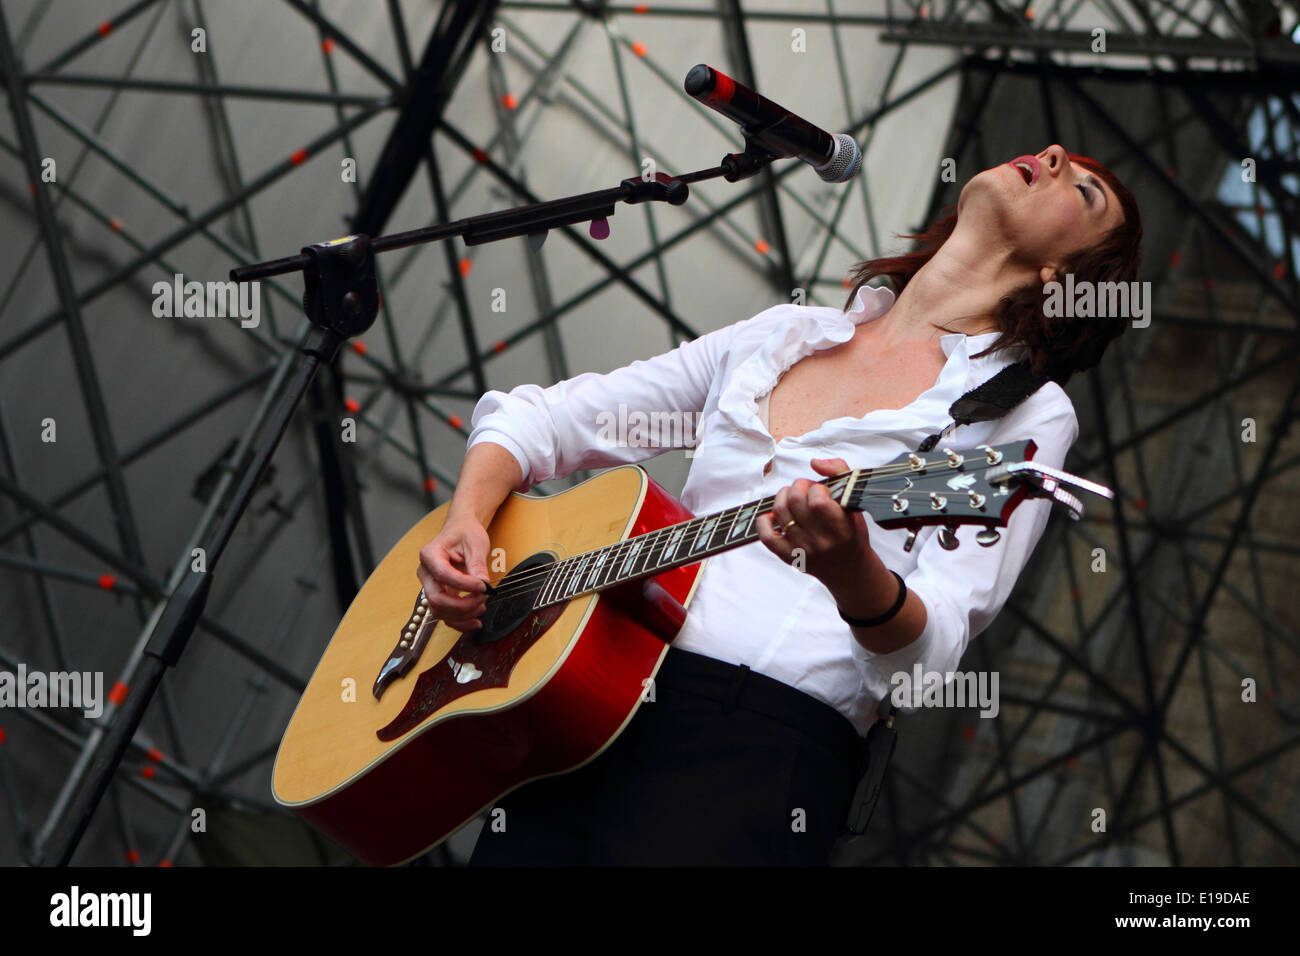 Italian singer and songwriter Cristina Donà performing in 2011 concert Stock Photo